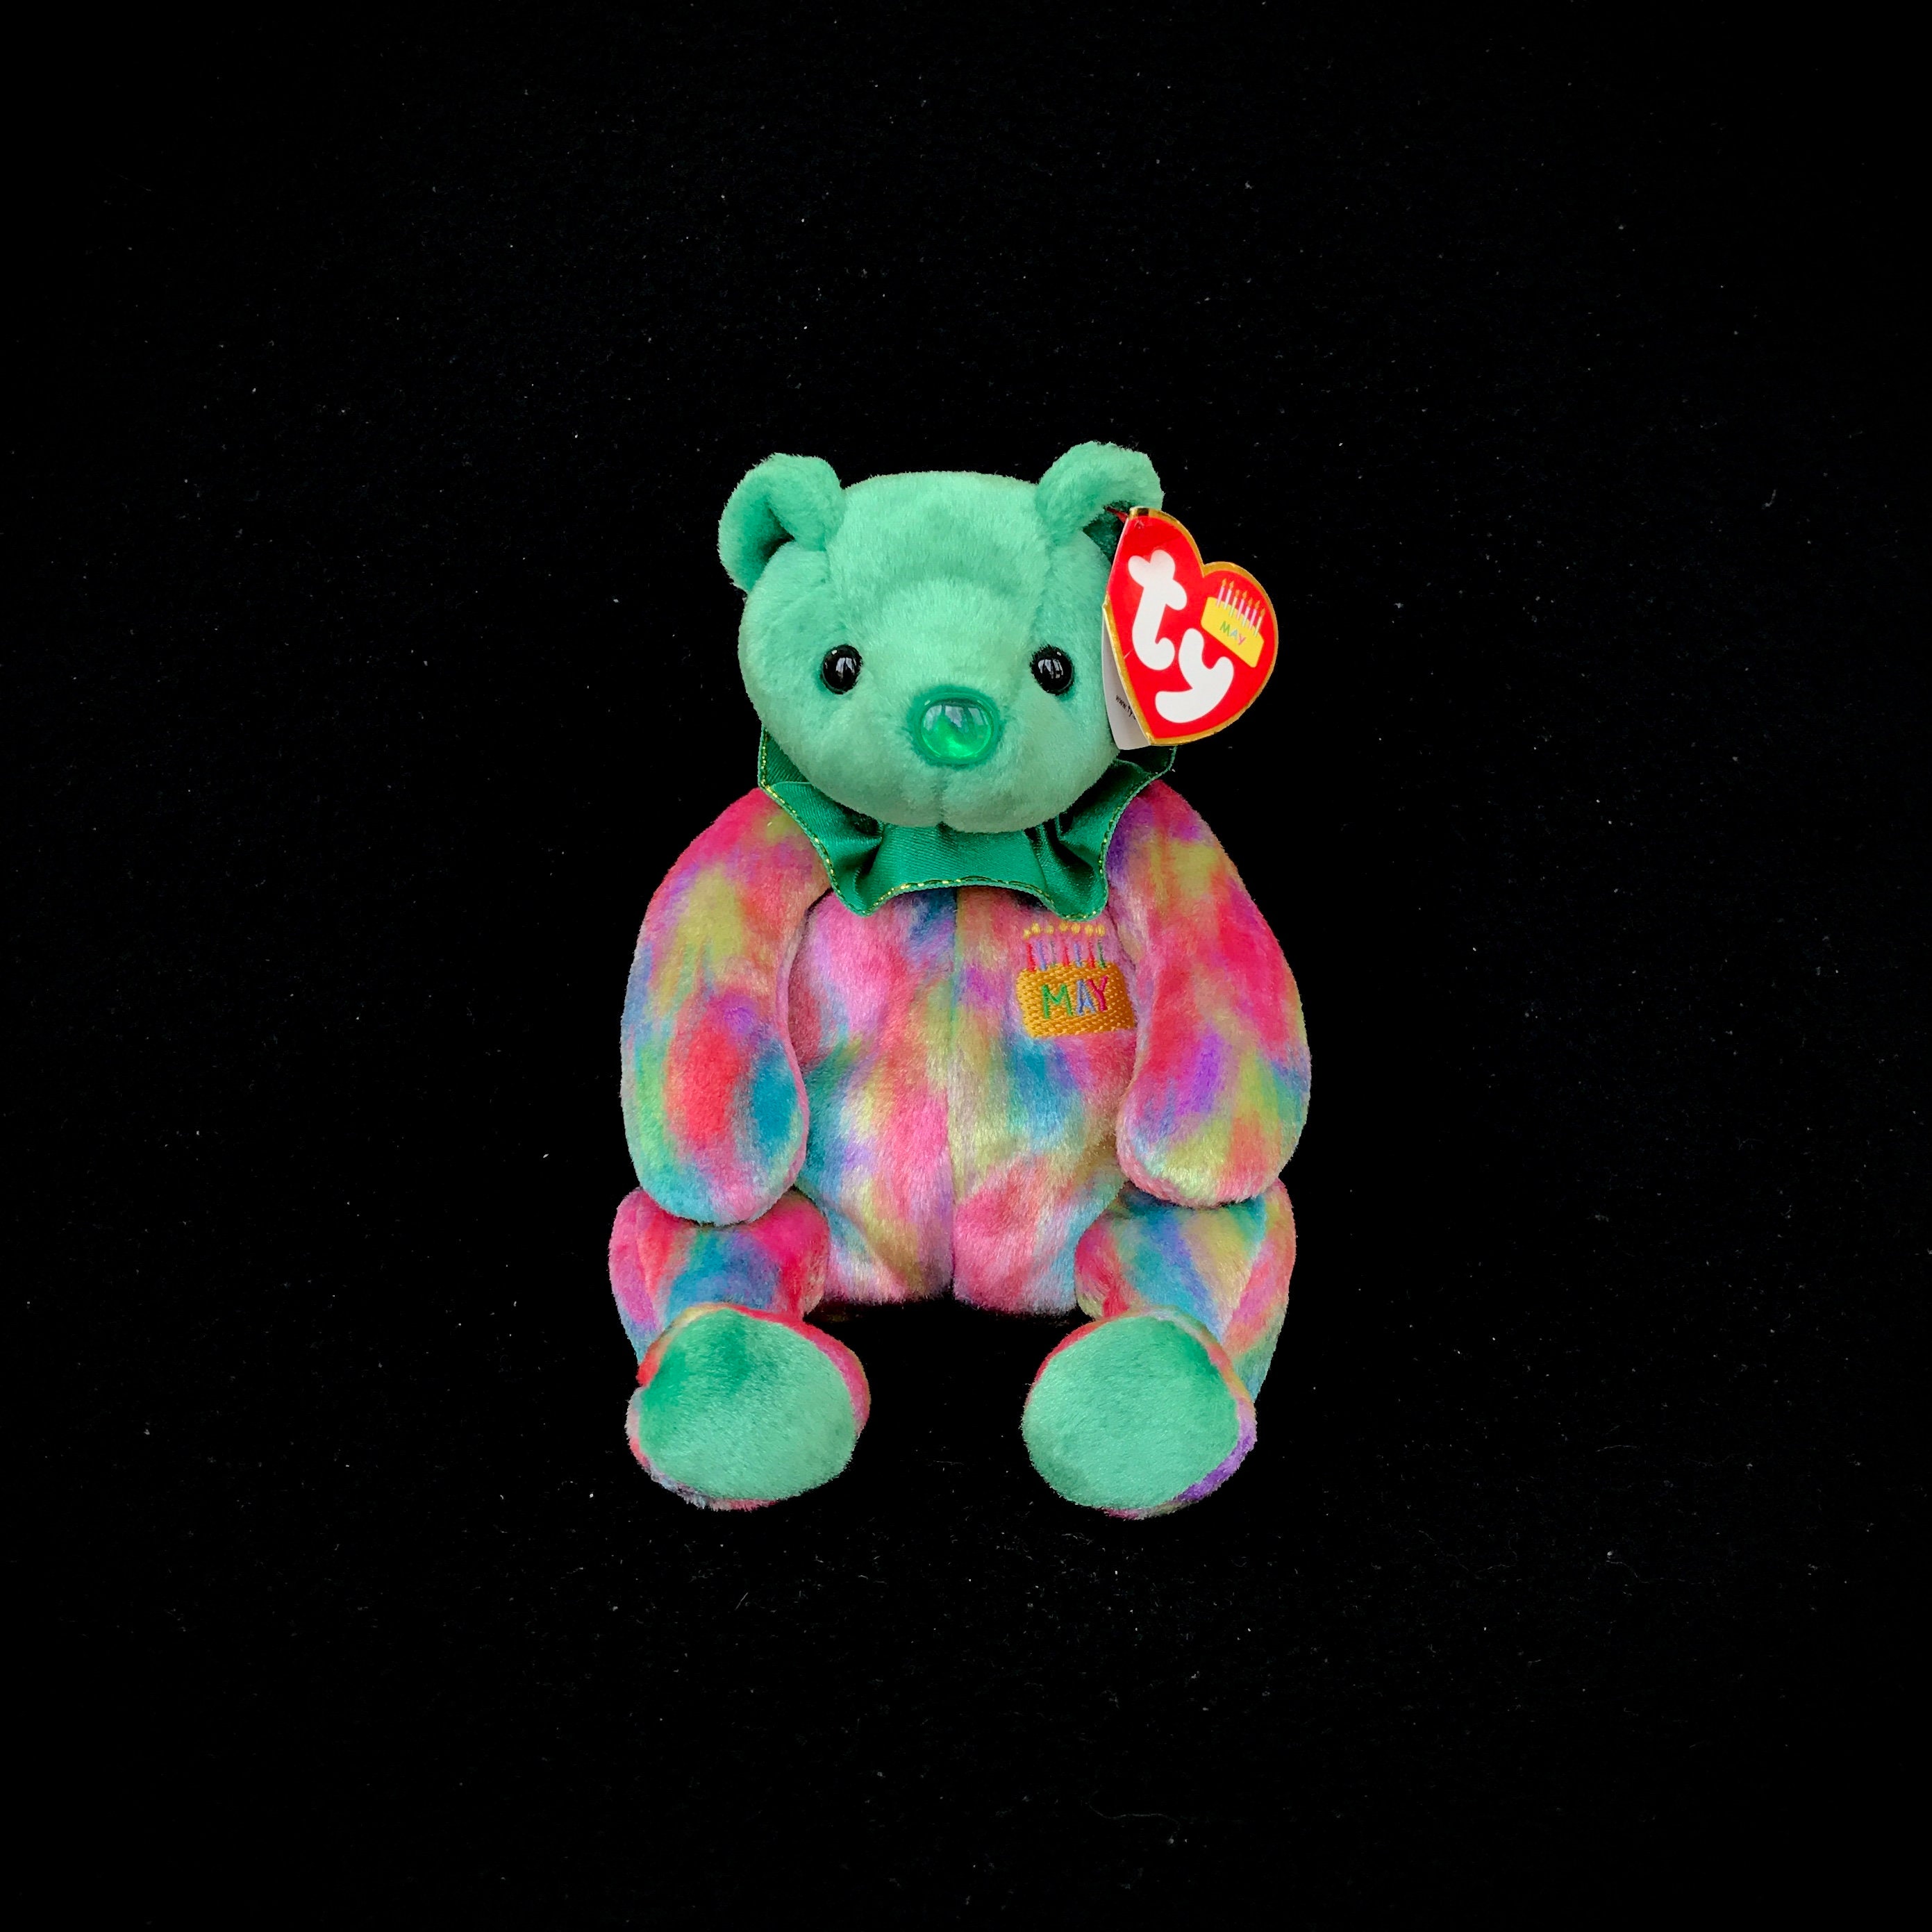 Mum Ty Beanie Baby Mothers Day Pink Teddy Bear MWMT Birthday May 13 2001 for sale online 